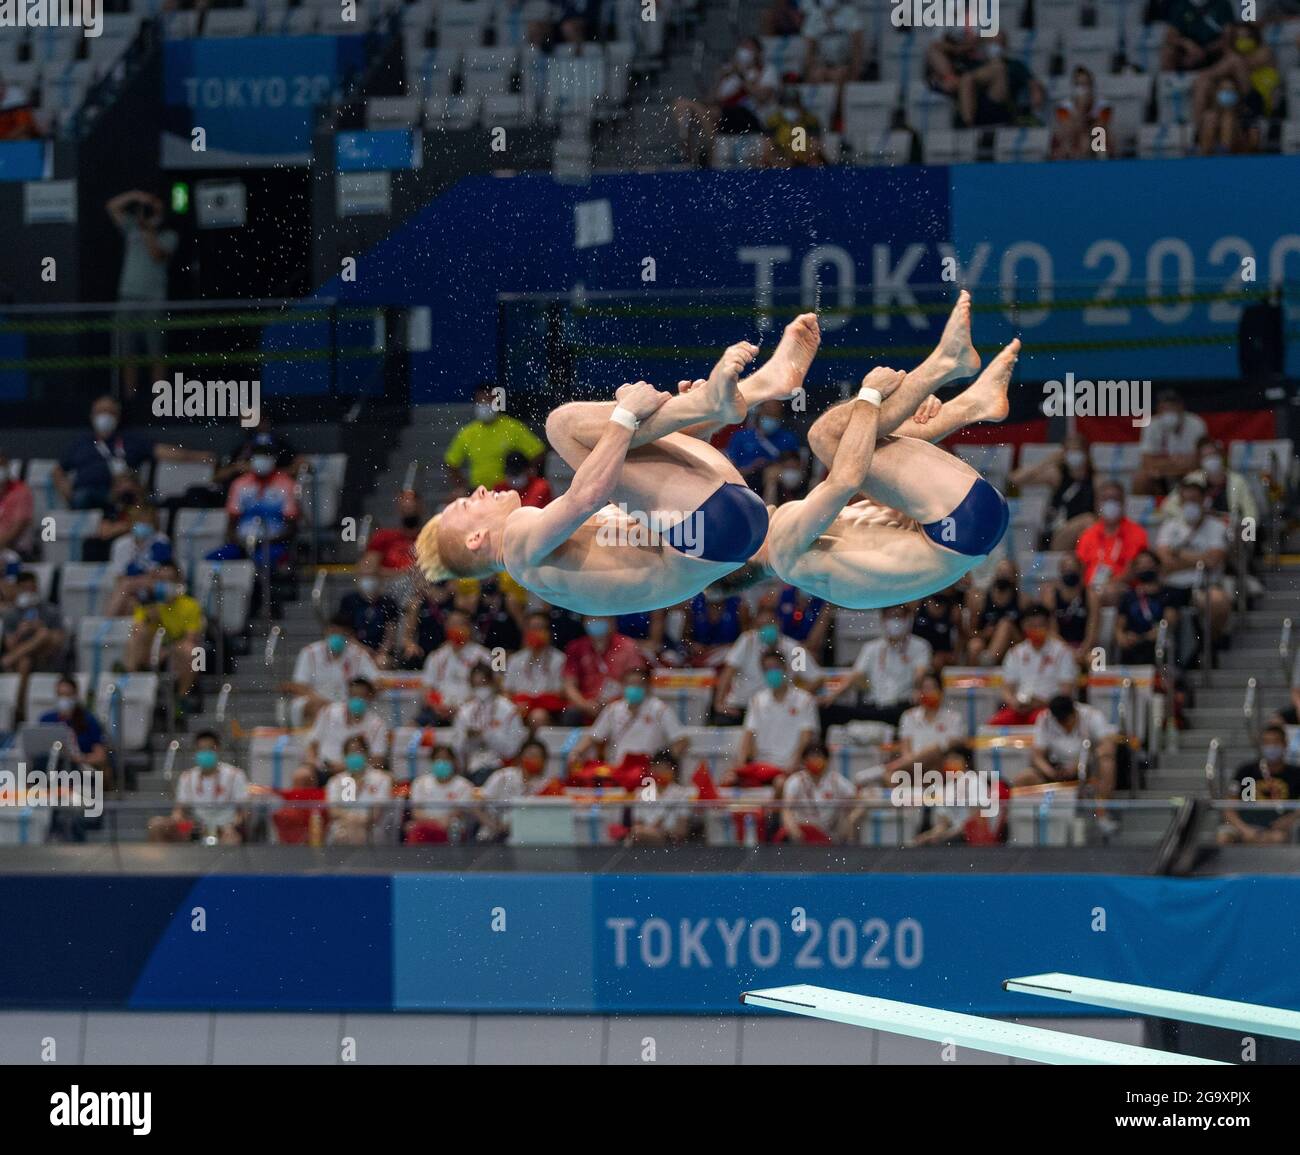 Tokyo Aquatics Centre, Tokyo, Japan. 28th July, 2021. Mens Syncronised 3m diving, Day 5 of Tokyo 2020 Summer Olympic Games; USA divers Andrew Capobianco and Michael Hixon Credit: Action Plus Sports/Alamy Live News Stock Photo